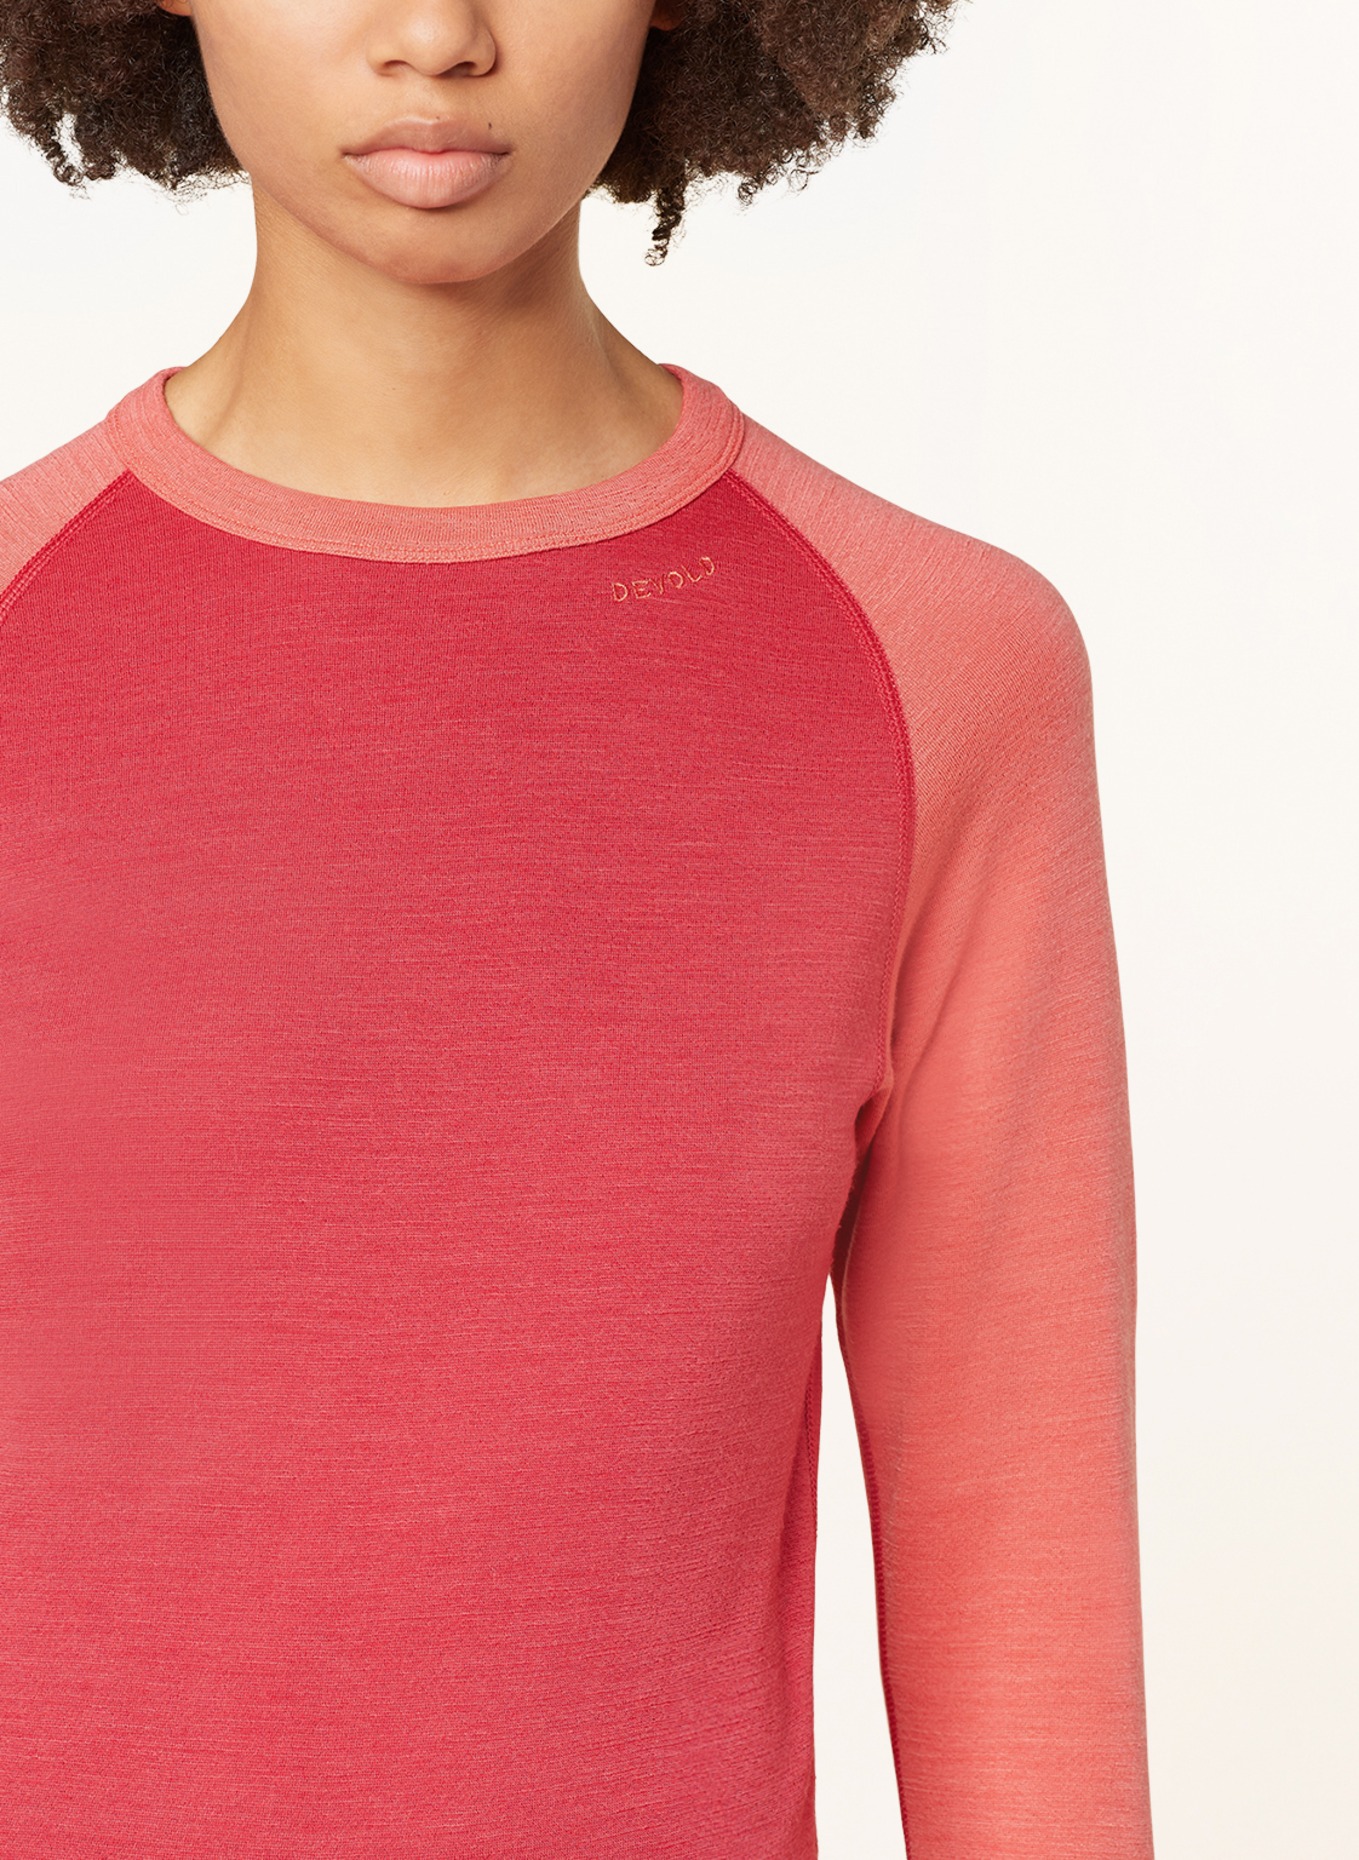 DEVOLD Functional underwear shirt EXPEDITION made of merino wool, Color: RED/ SALMON (Image 4)